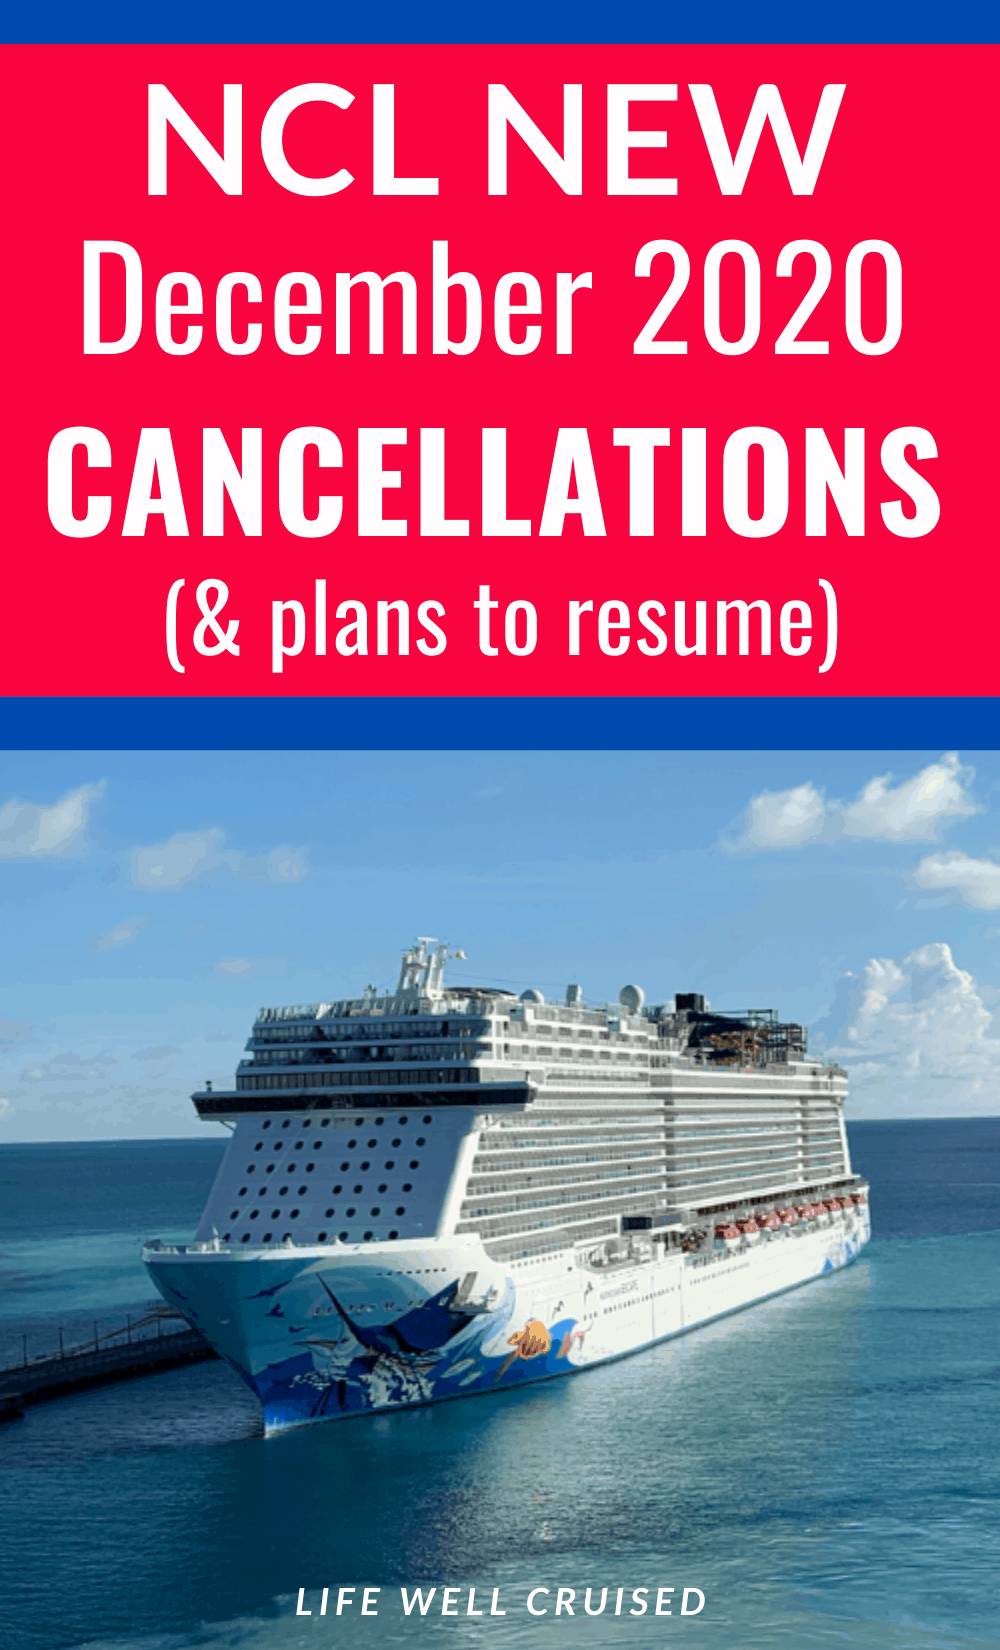 Norwegian Cruise Line New December Cruise Cancellations (update on